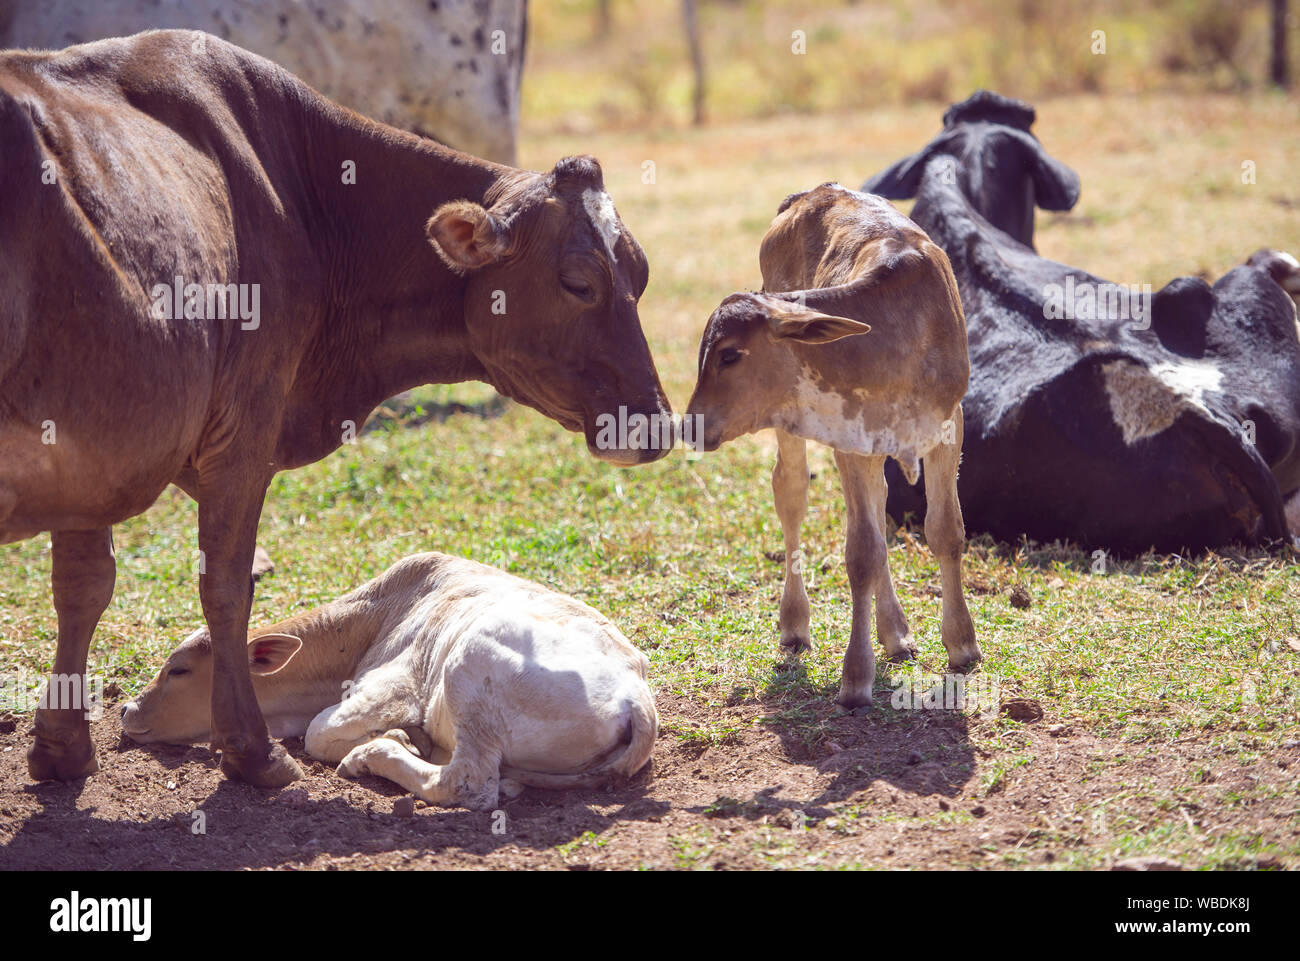 Rural image. Mother cow taking care of newborn calf. Concept image of farm life. Stock Photo